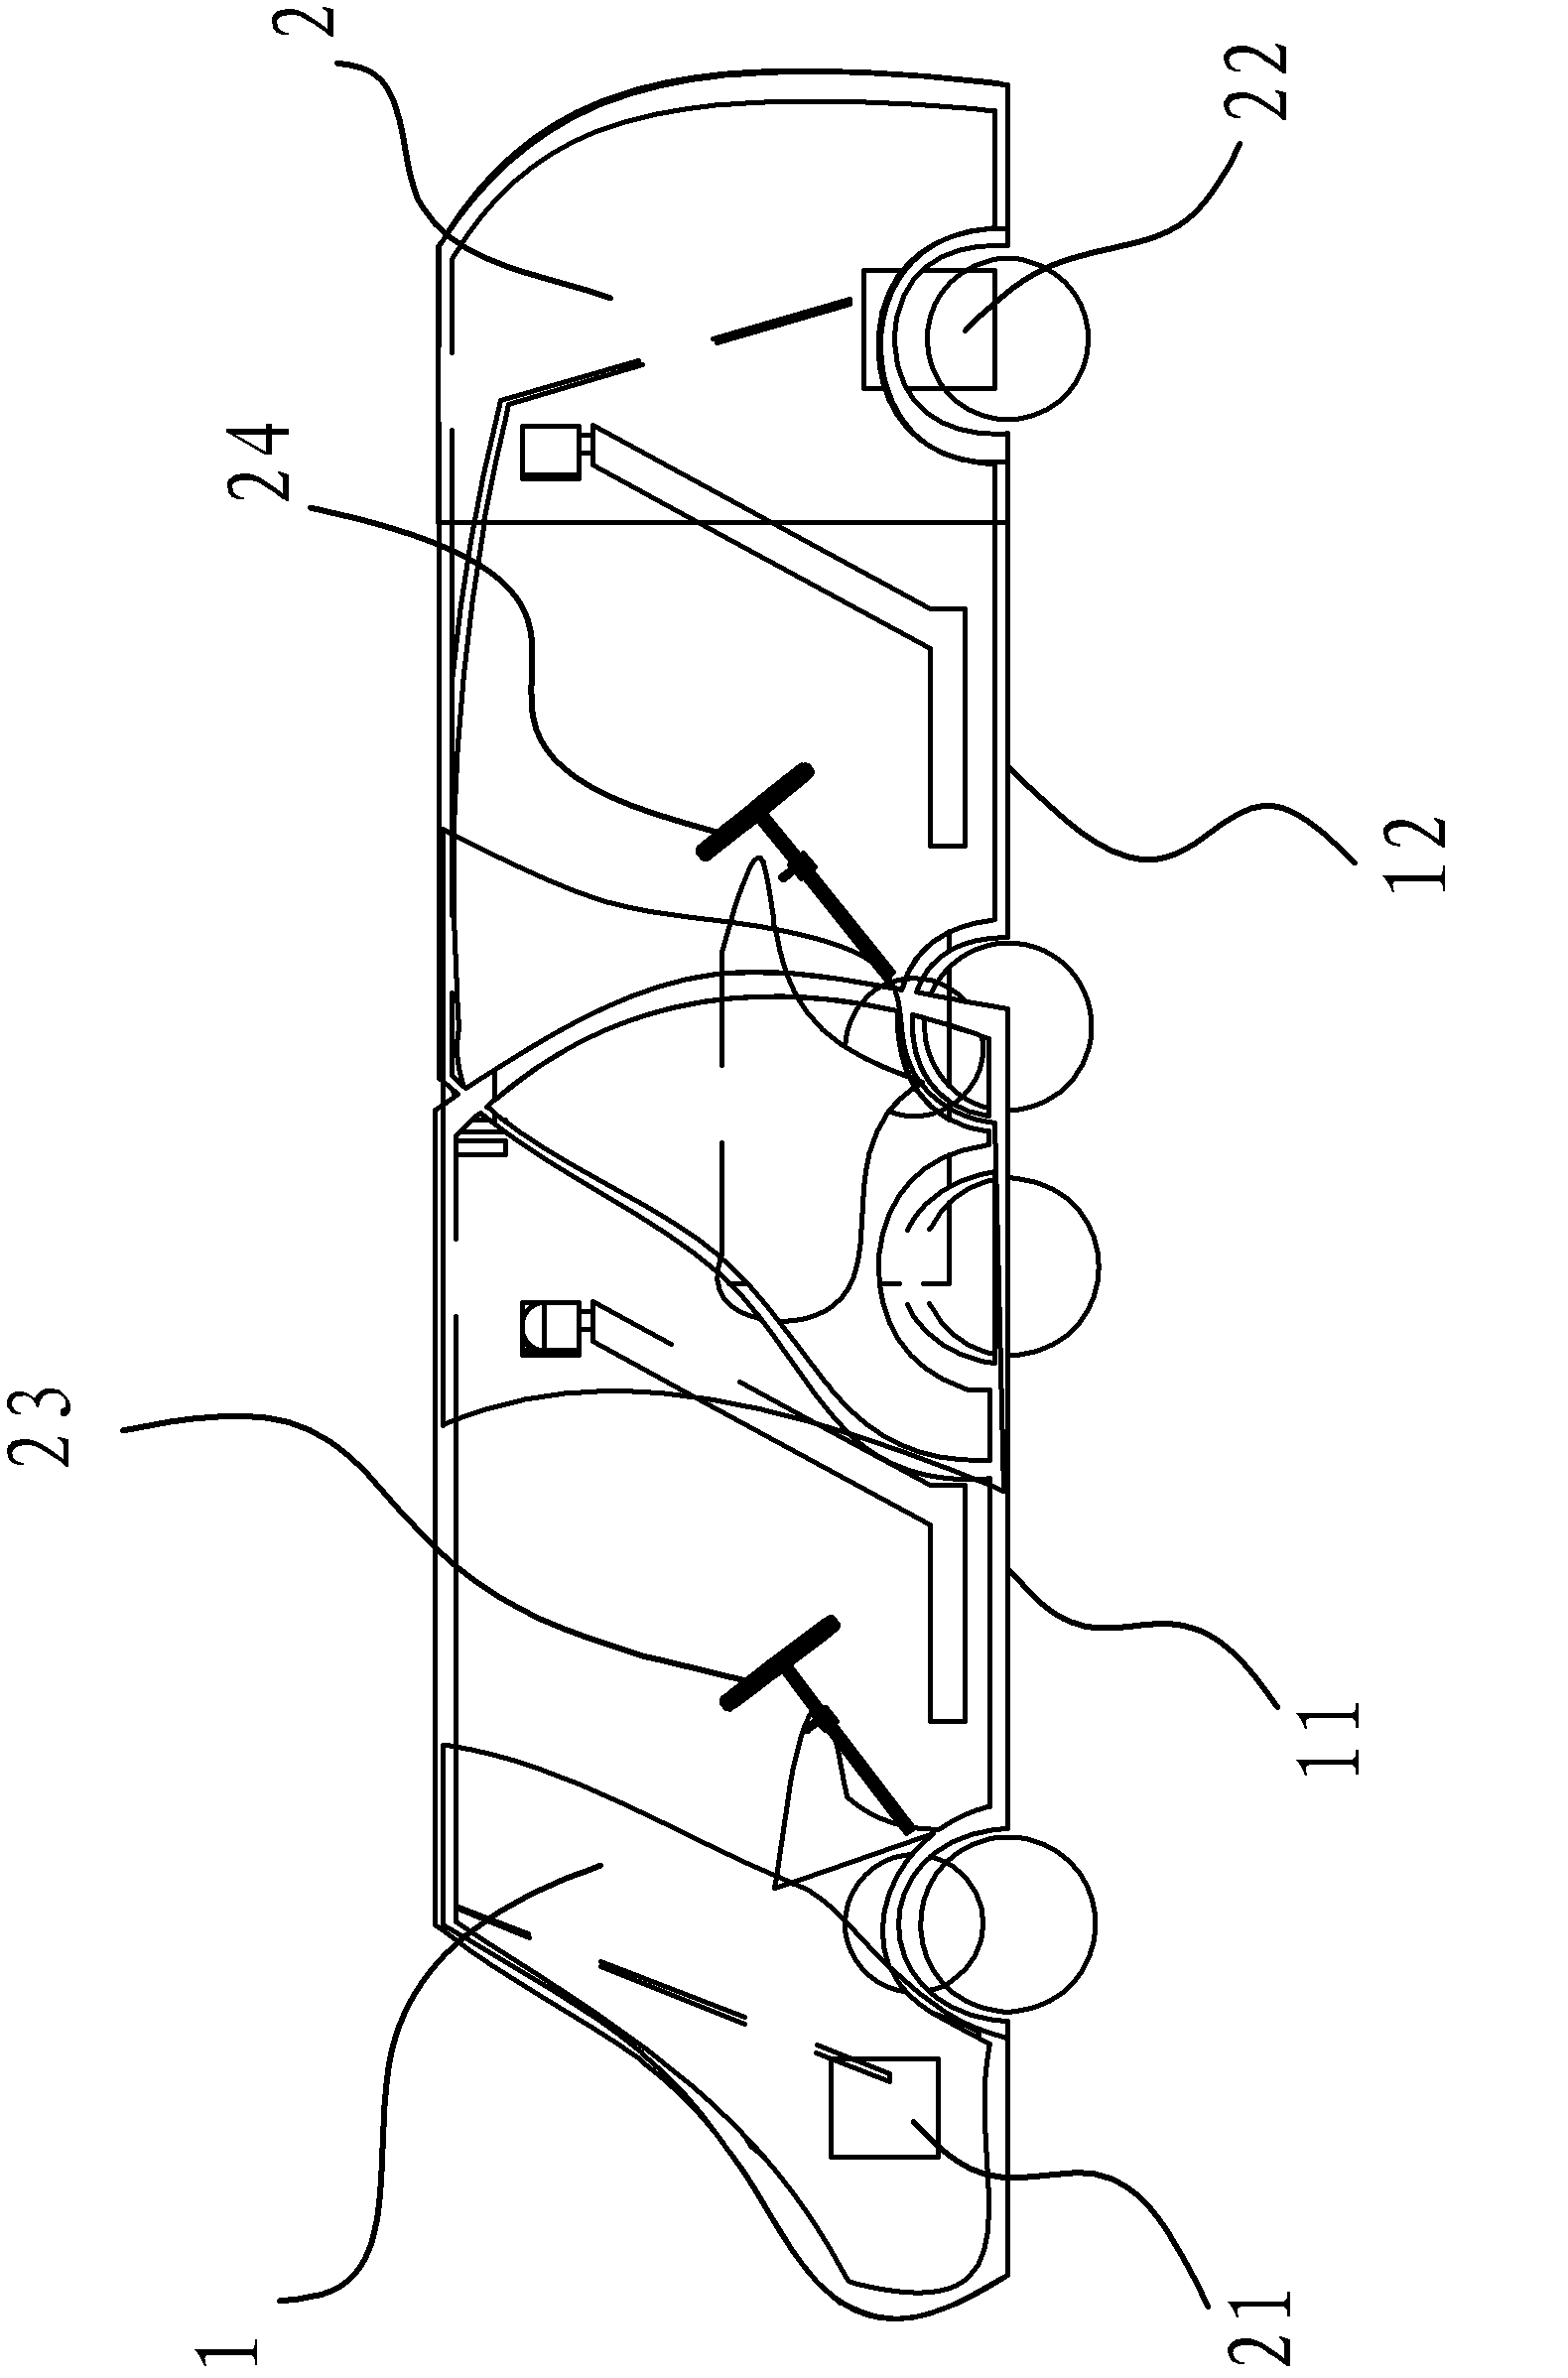 Combined automobile with automobile head in butt joint with automobile tail